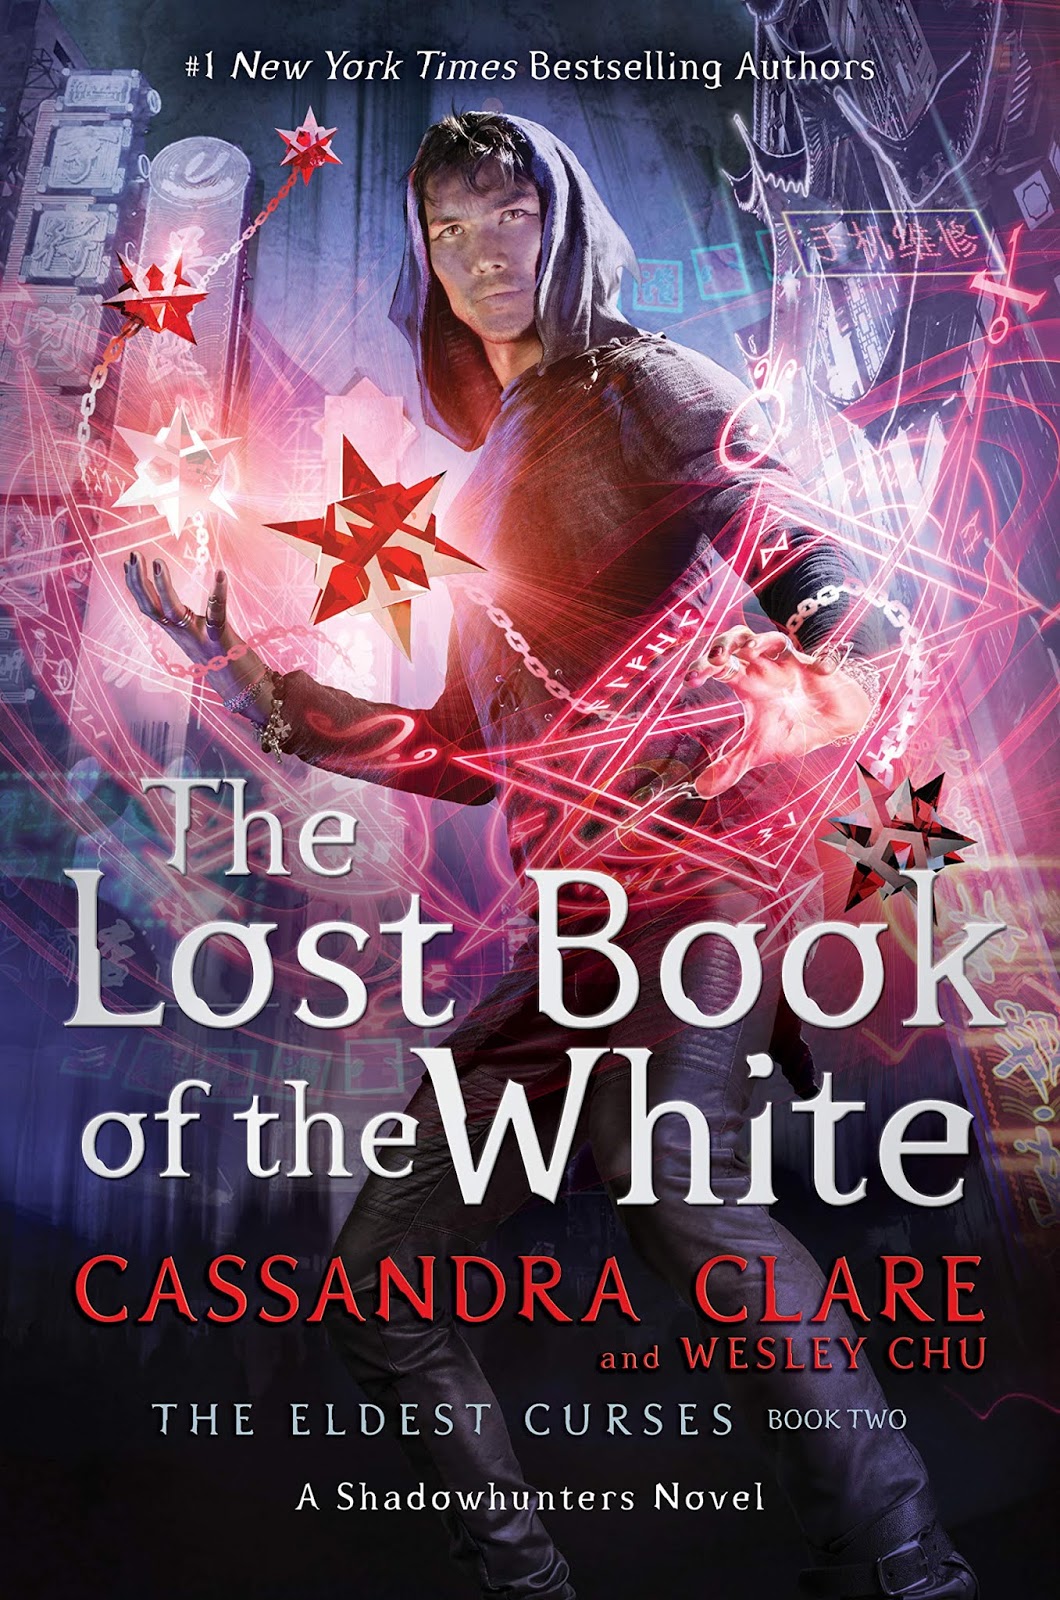 The Lost Book of the White by Cassandra Clare & Wesley Chu